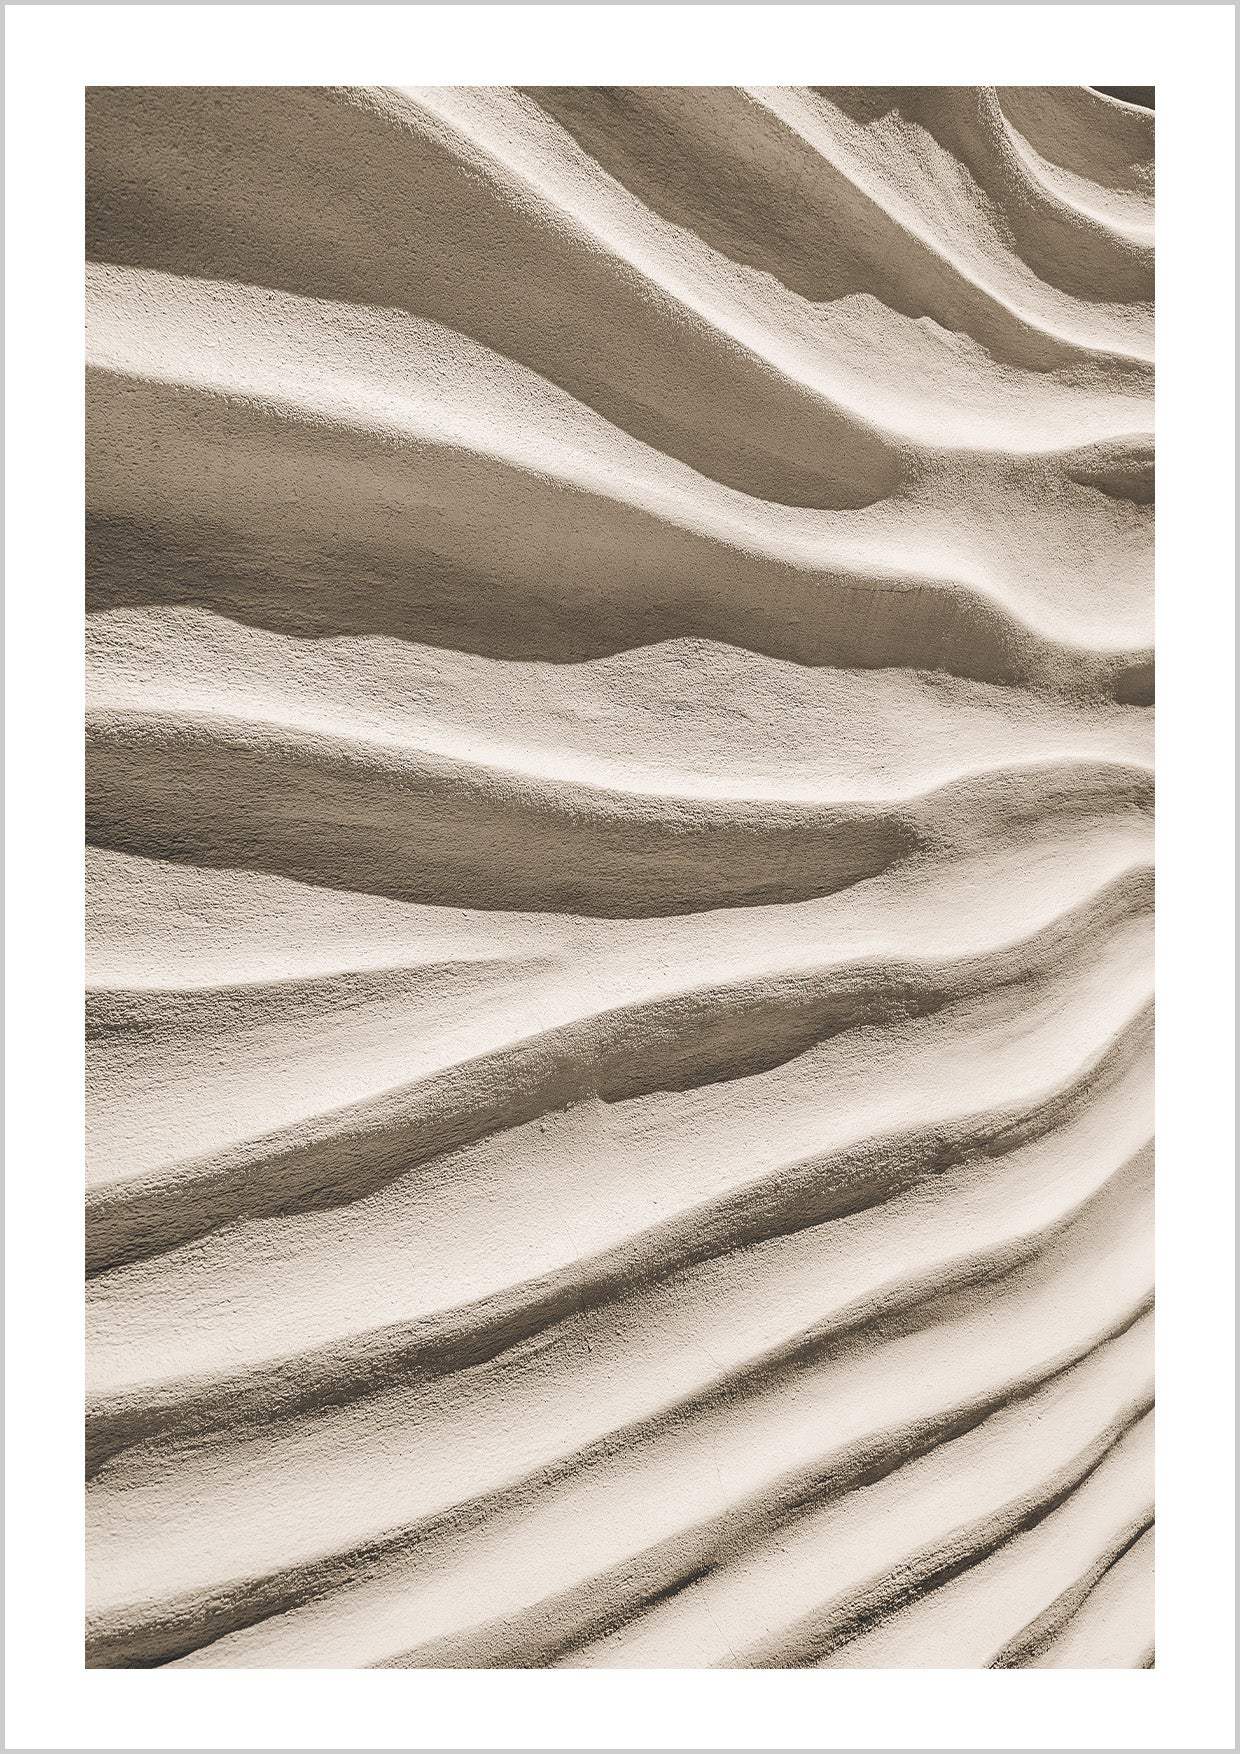 Closed-up photography of sand piles texture